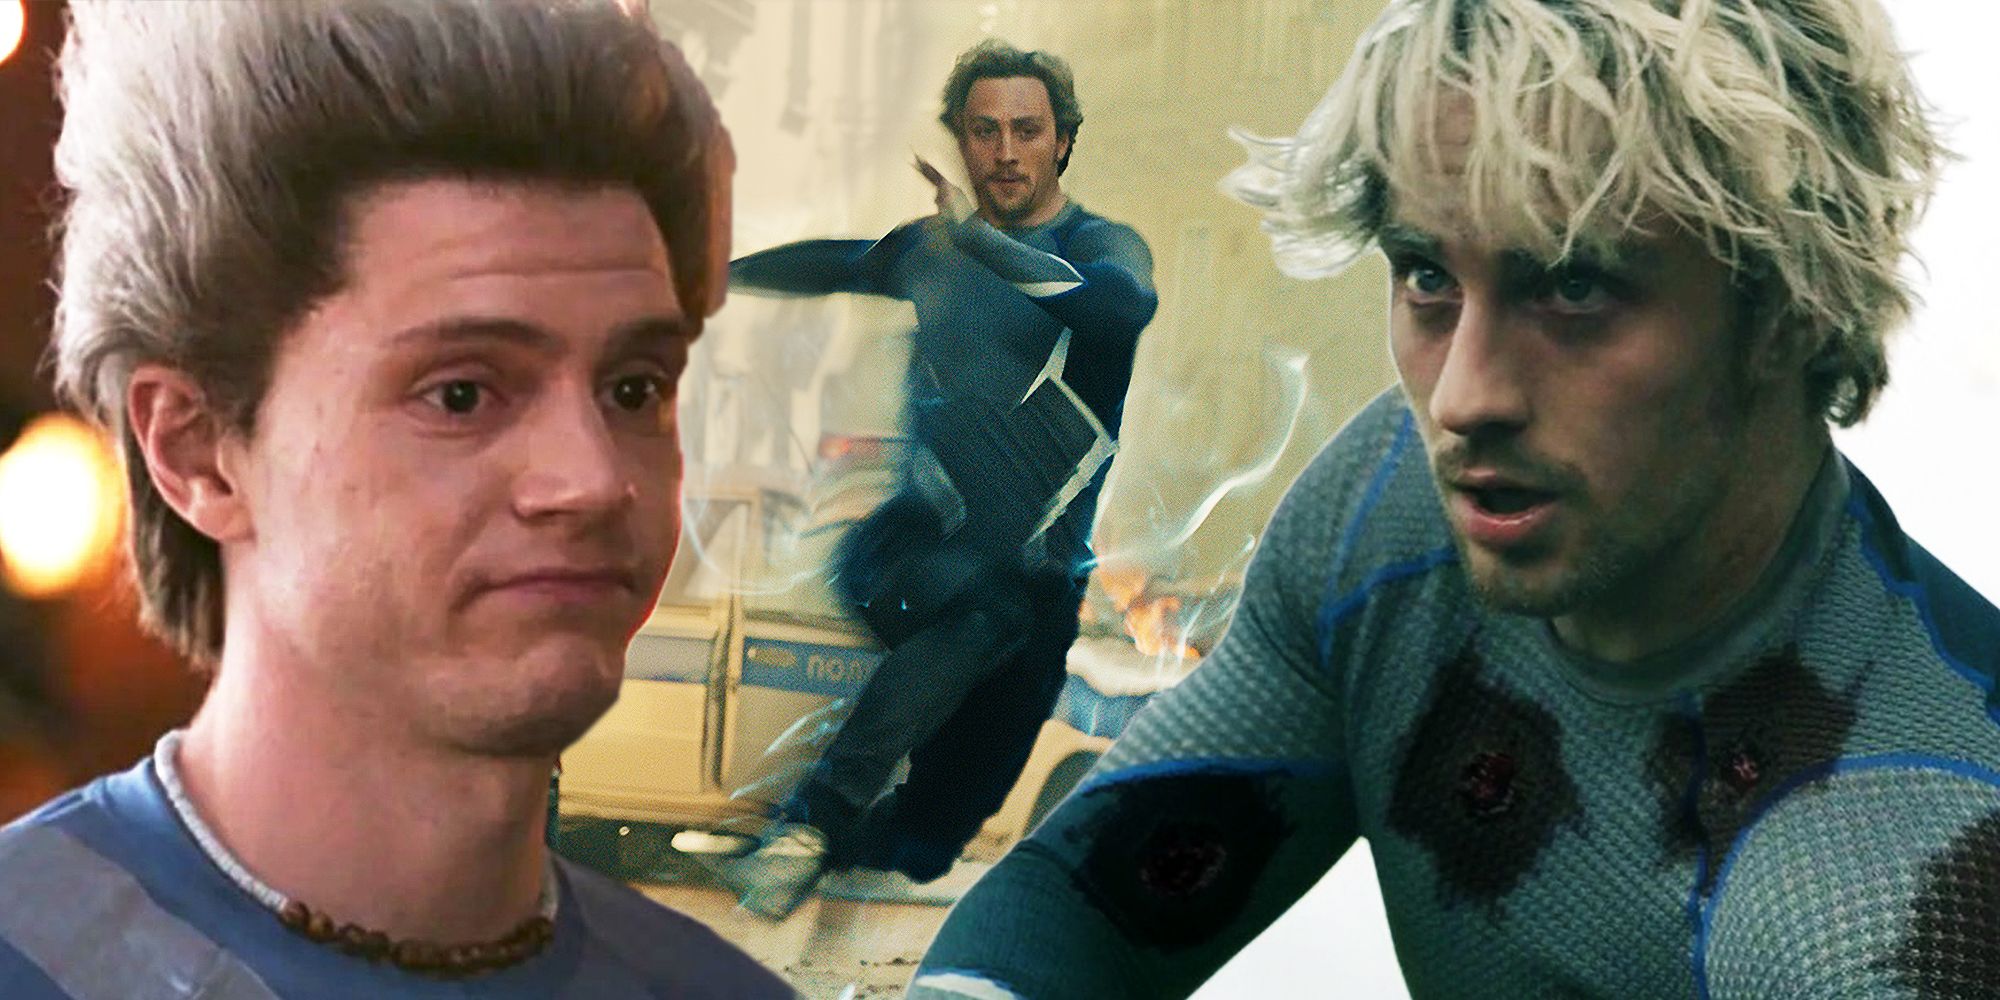 Evan Peters as Quicksilver in WandaVision and Aaron Taylor-Johnson as Pietro Maximoff in Avengers Age of Ultron